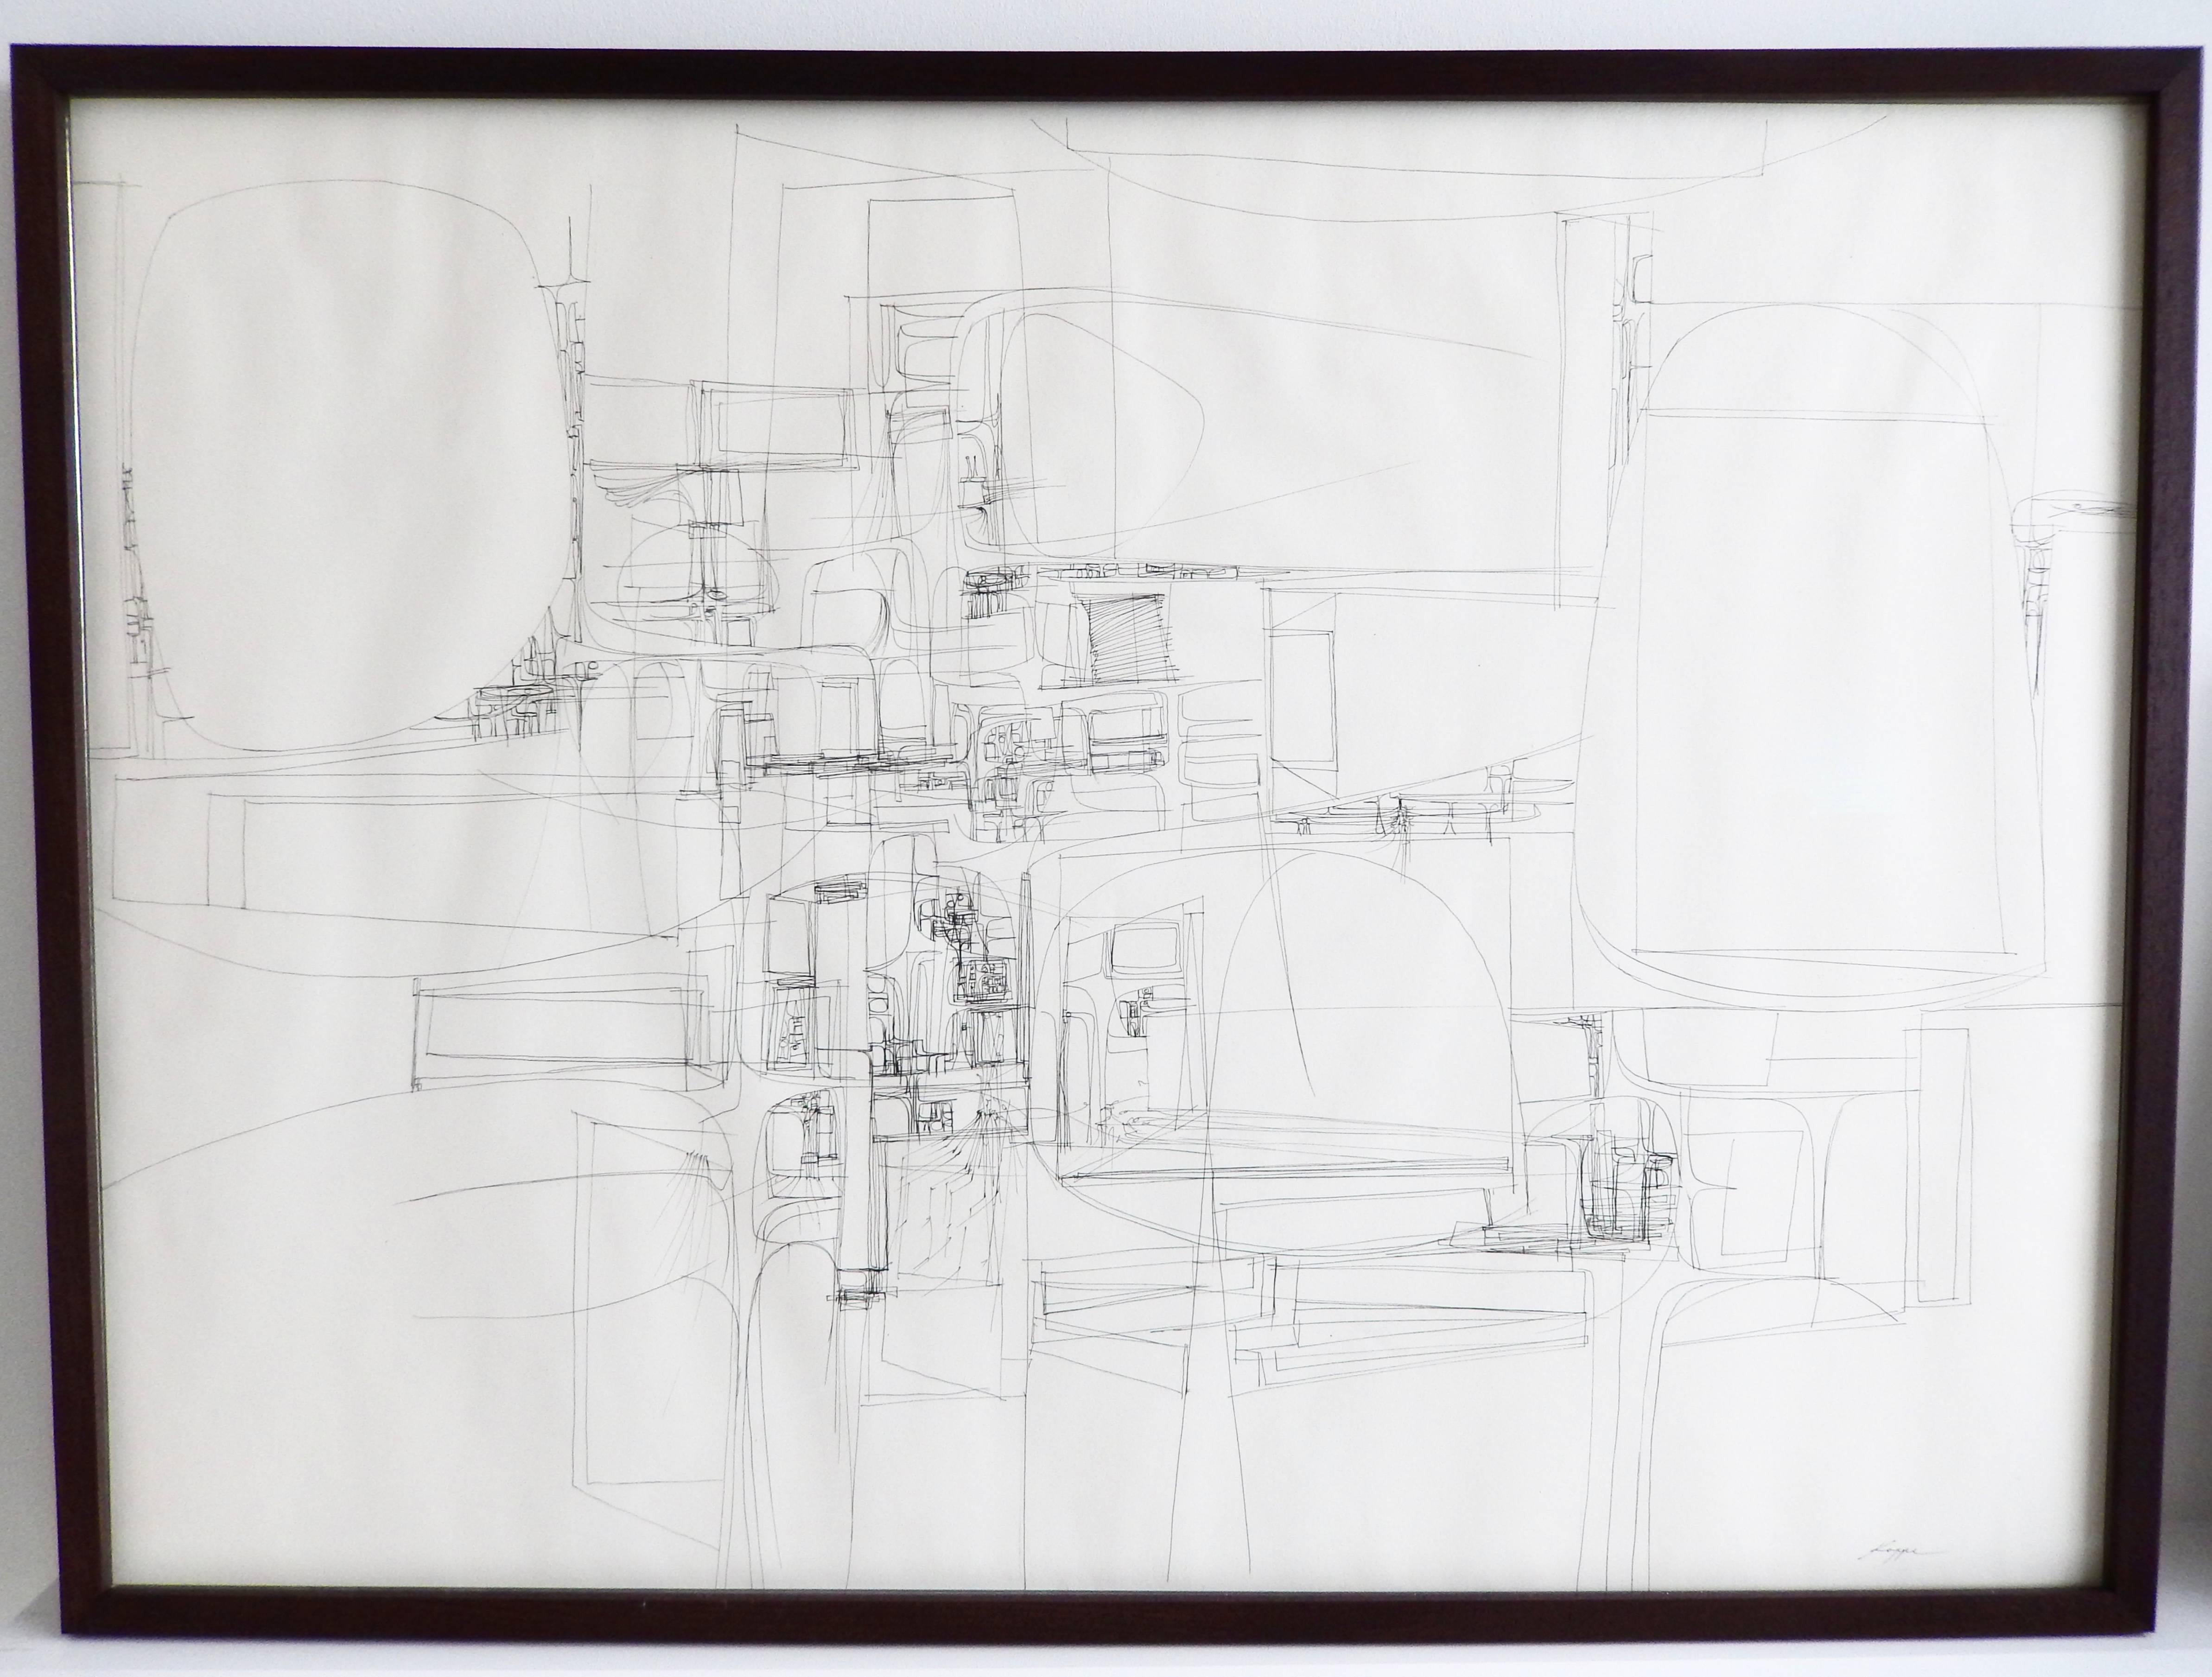 A large, intricate ink drawing resembling a stylized architectural rendering by American modernist Richard Koppe (1916-1973). A multi-talented artist, Koppe was a painter, sculptor, muralist, designer and educator. Throughout his career Koppe